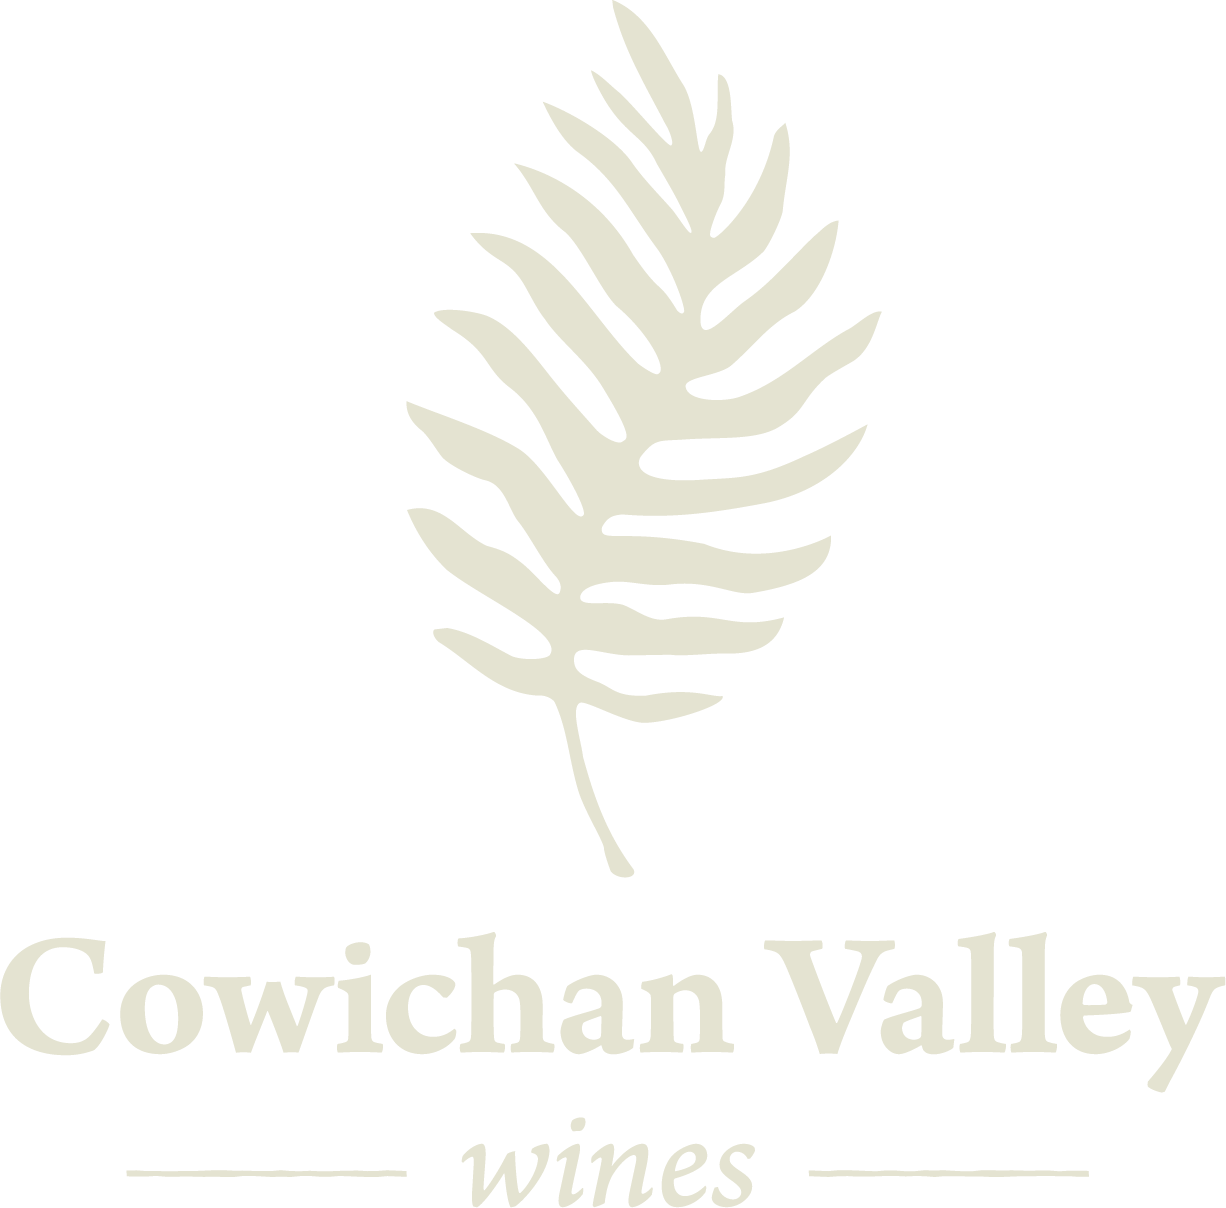 Cowichan Wineries Society